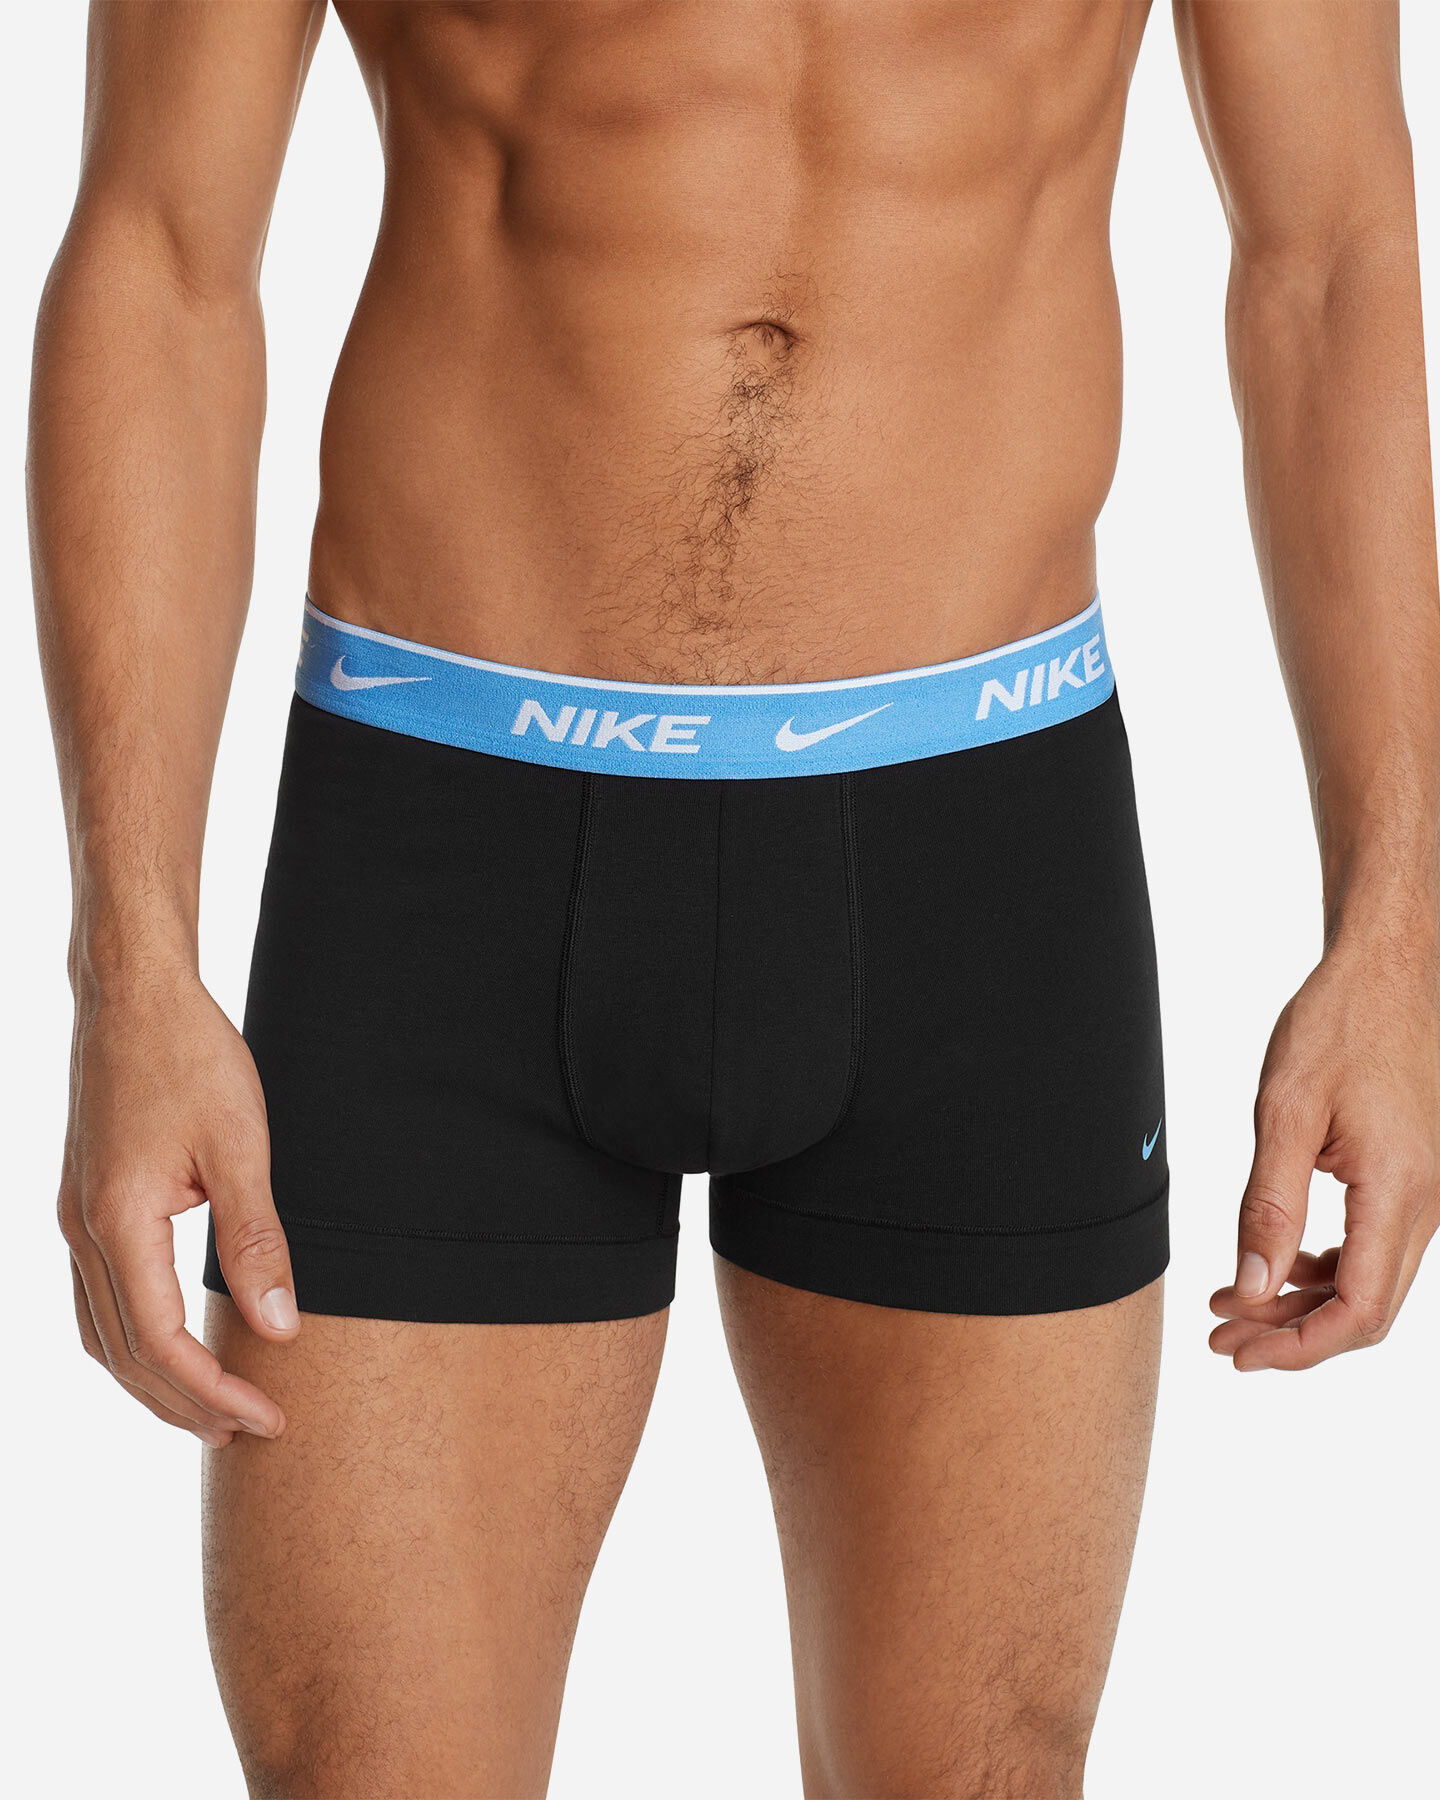  Intimo NIKE 3PACK BOXER EVERYDAY M S4095167|9JM|XS scatto 1